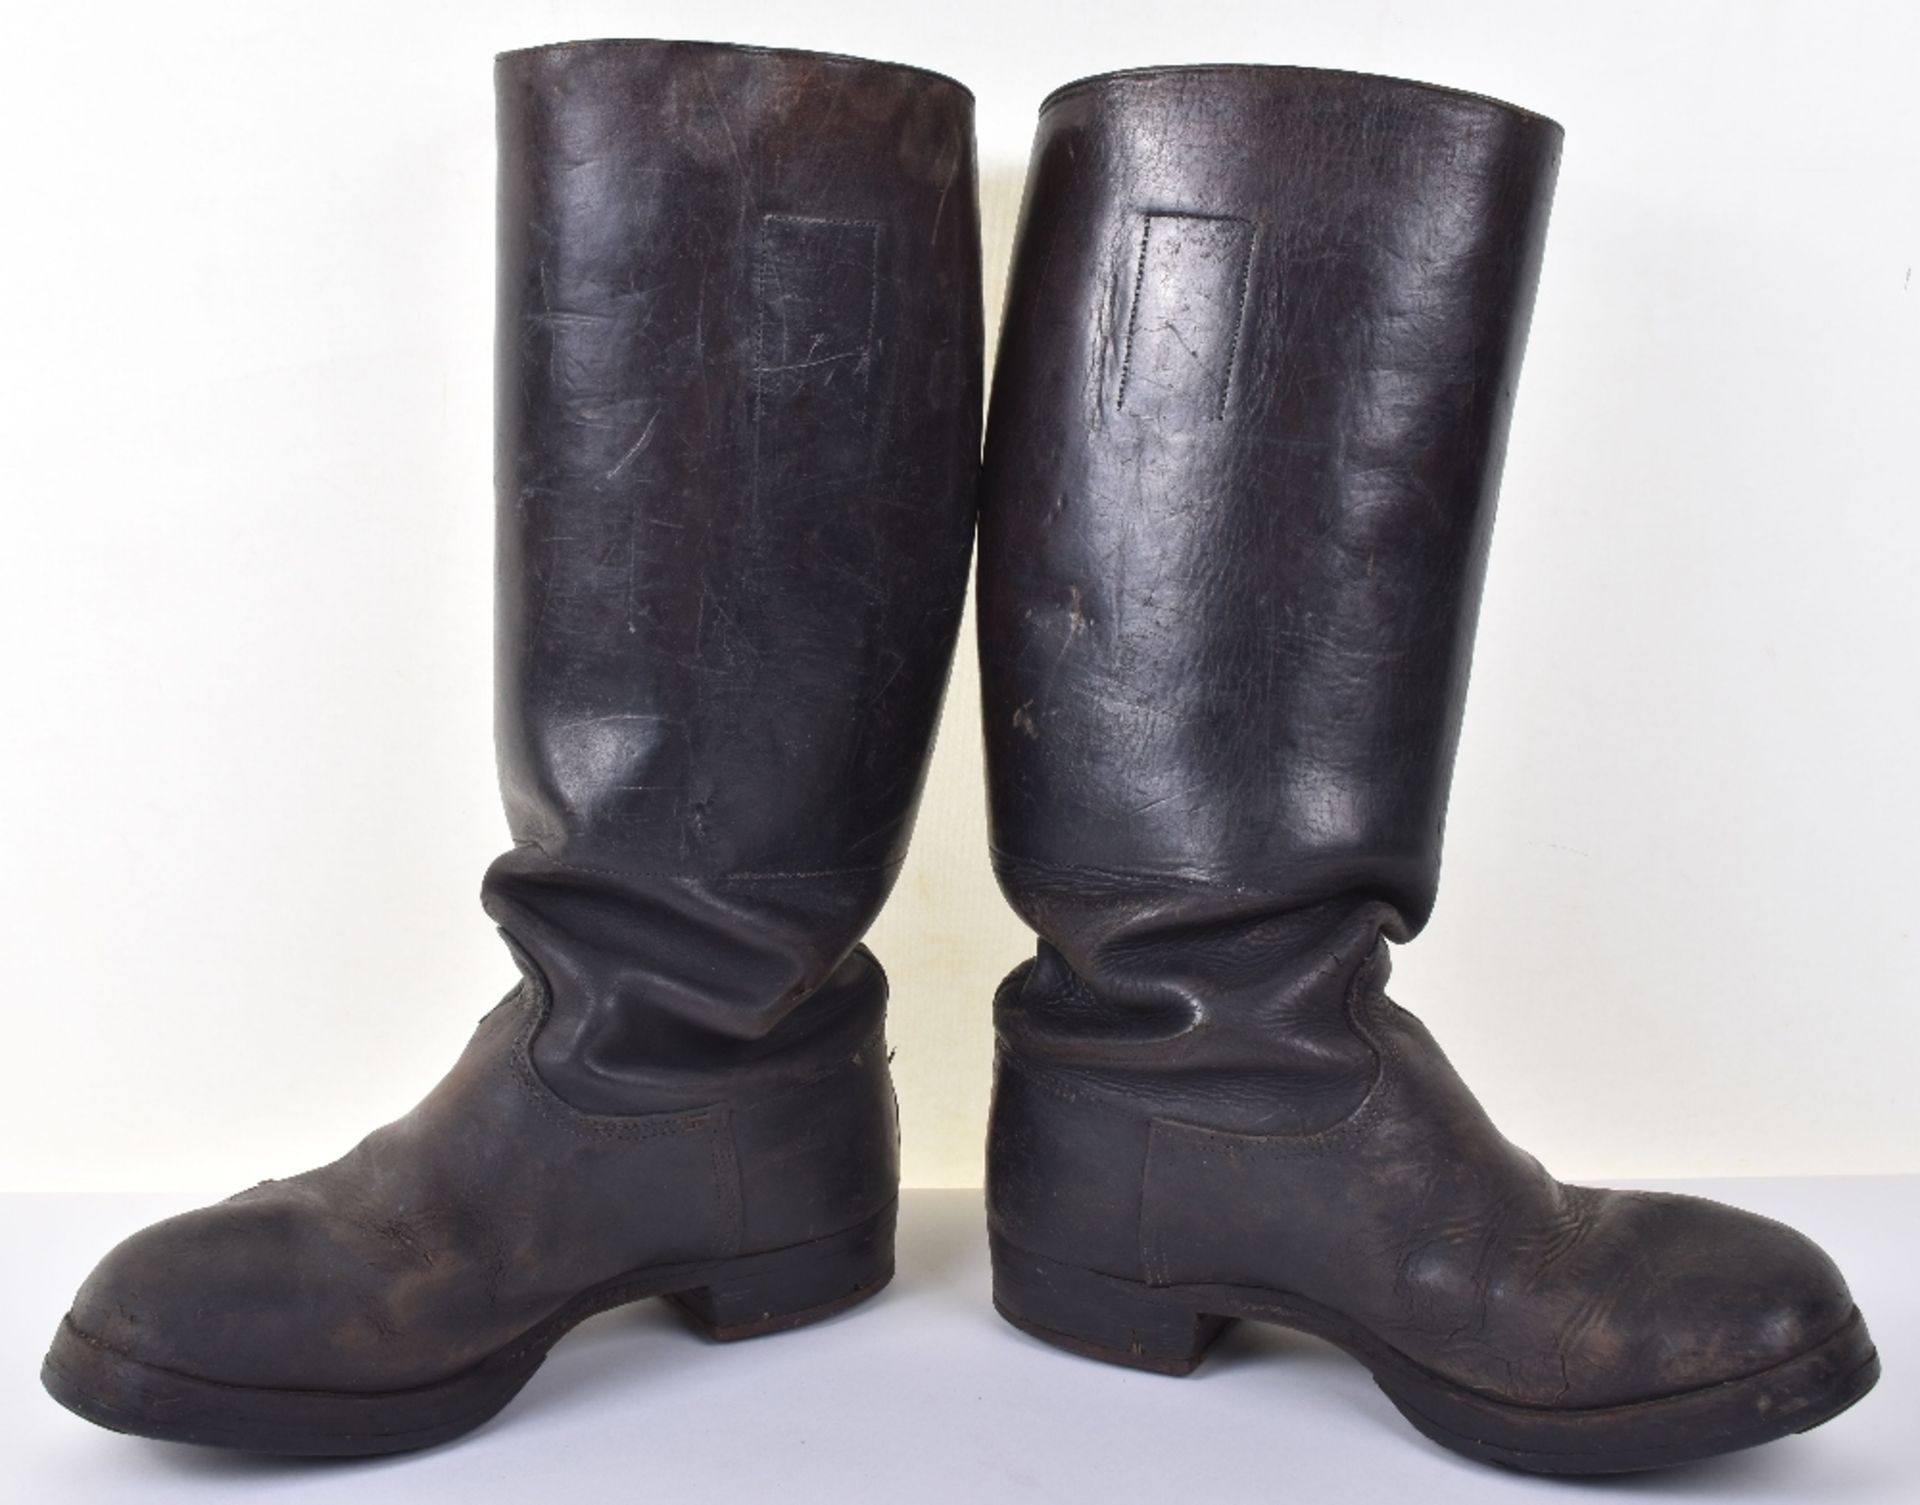 WW2 German Army Officers Jack Boots - Image 3 of 4